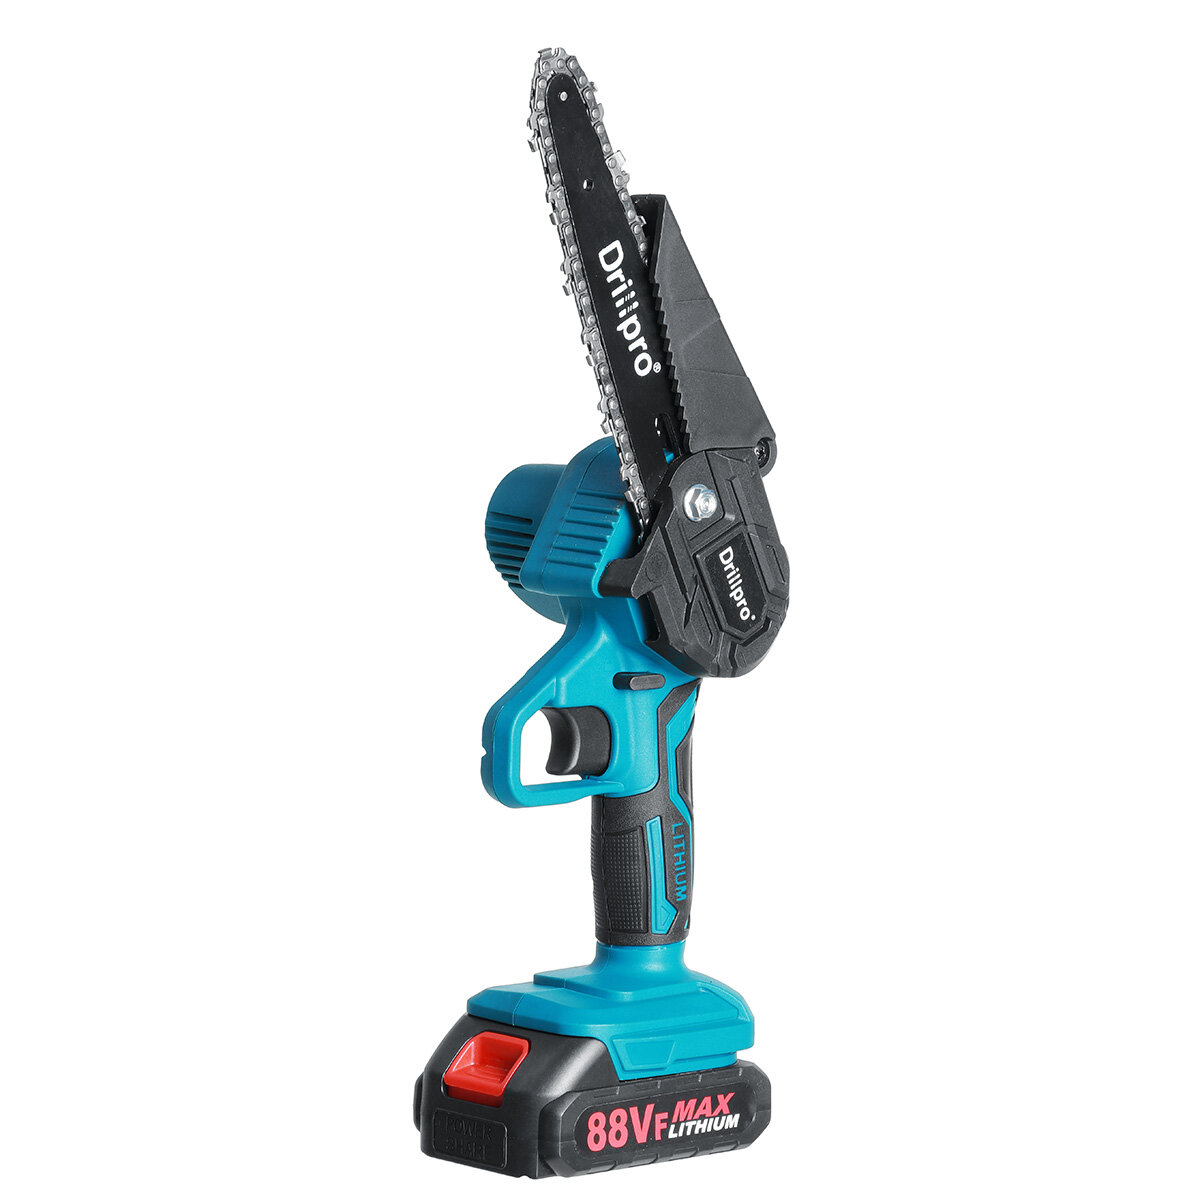 best price,drillpro,6,inch,electric,chain,saw,with,2,batteries,eu,coupon,price,discount